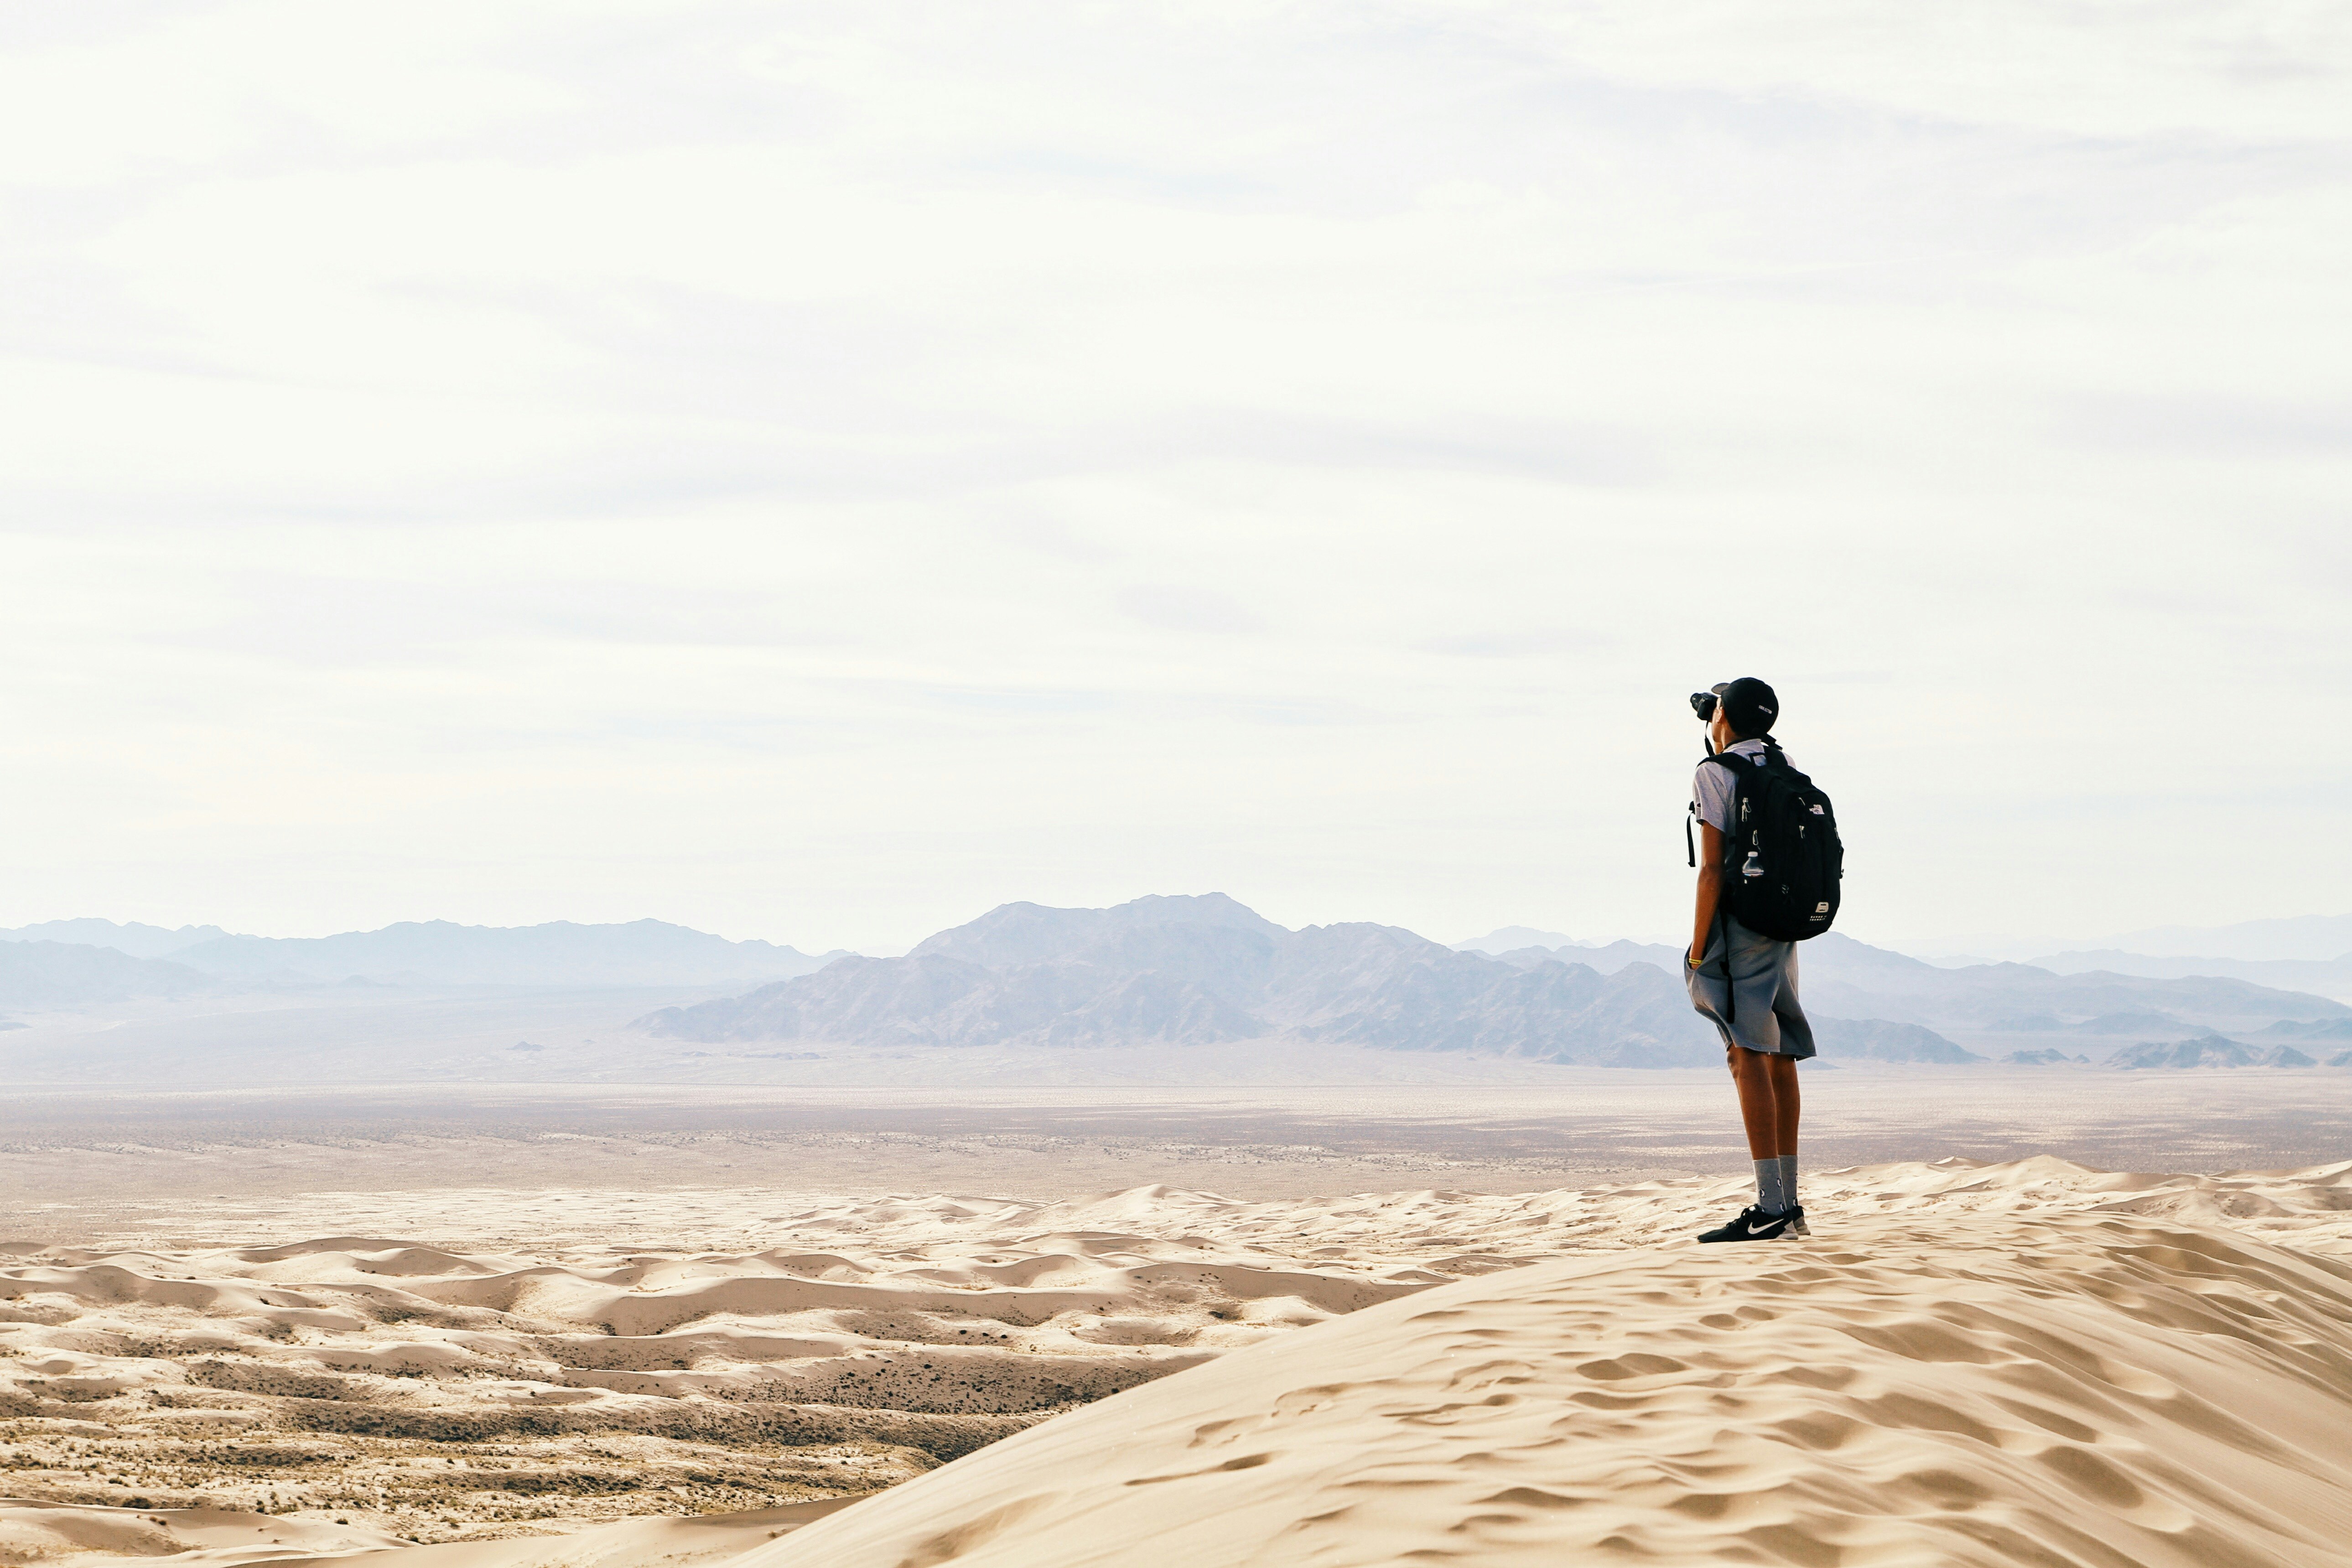 man standing and carrying backpack in desert land